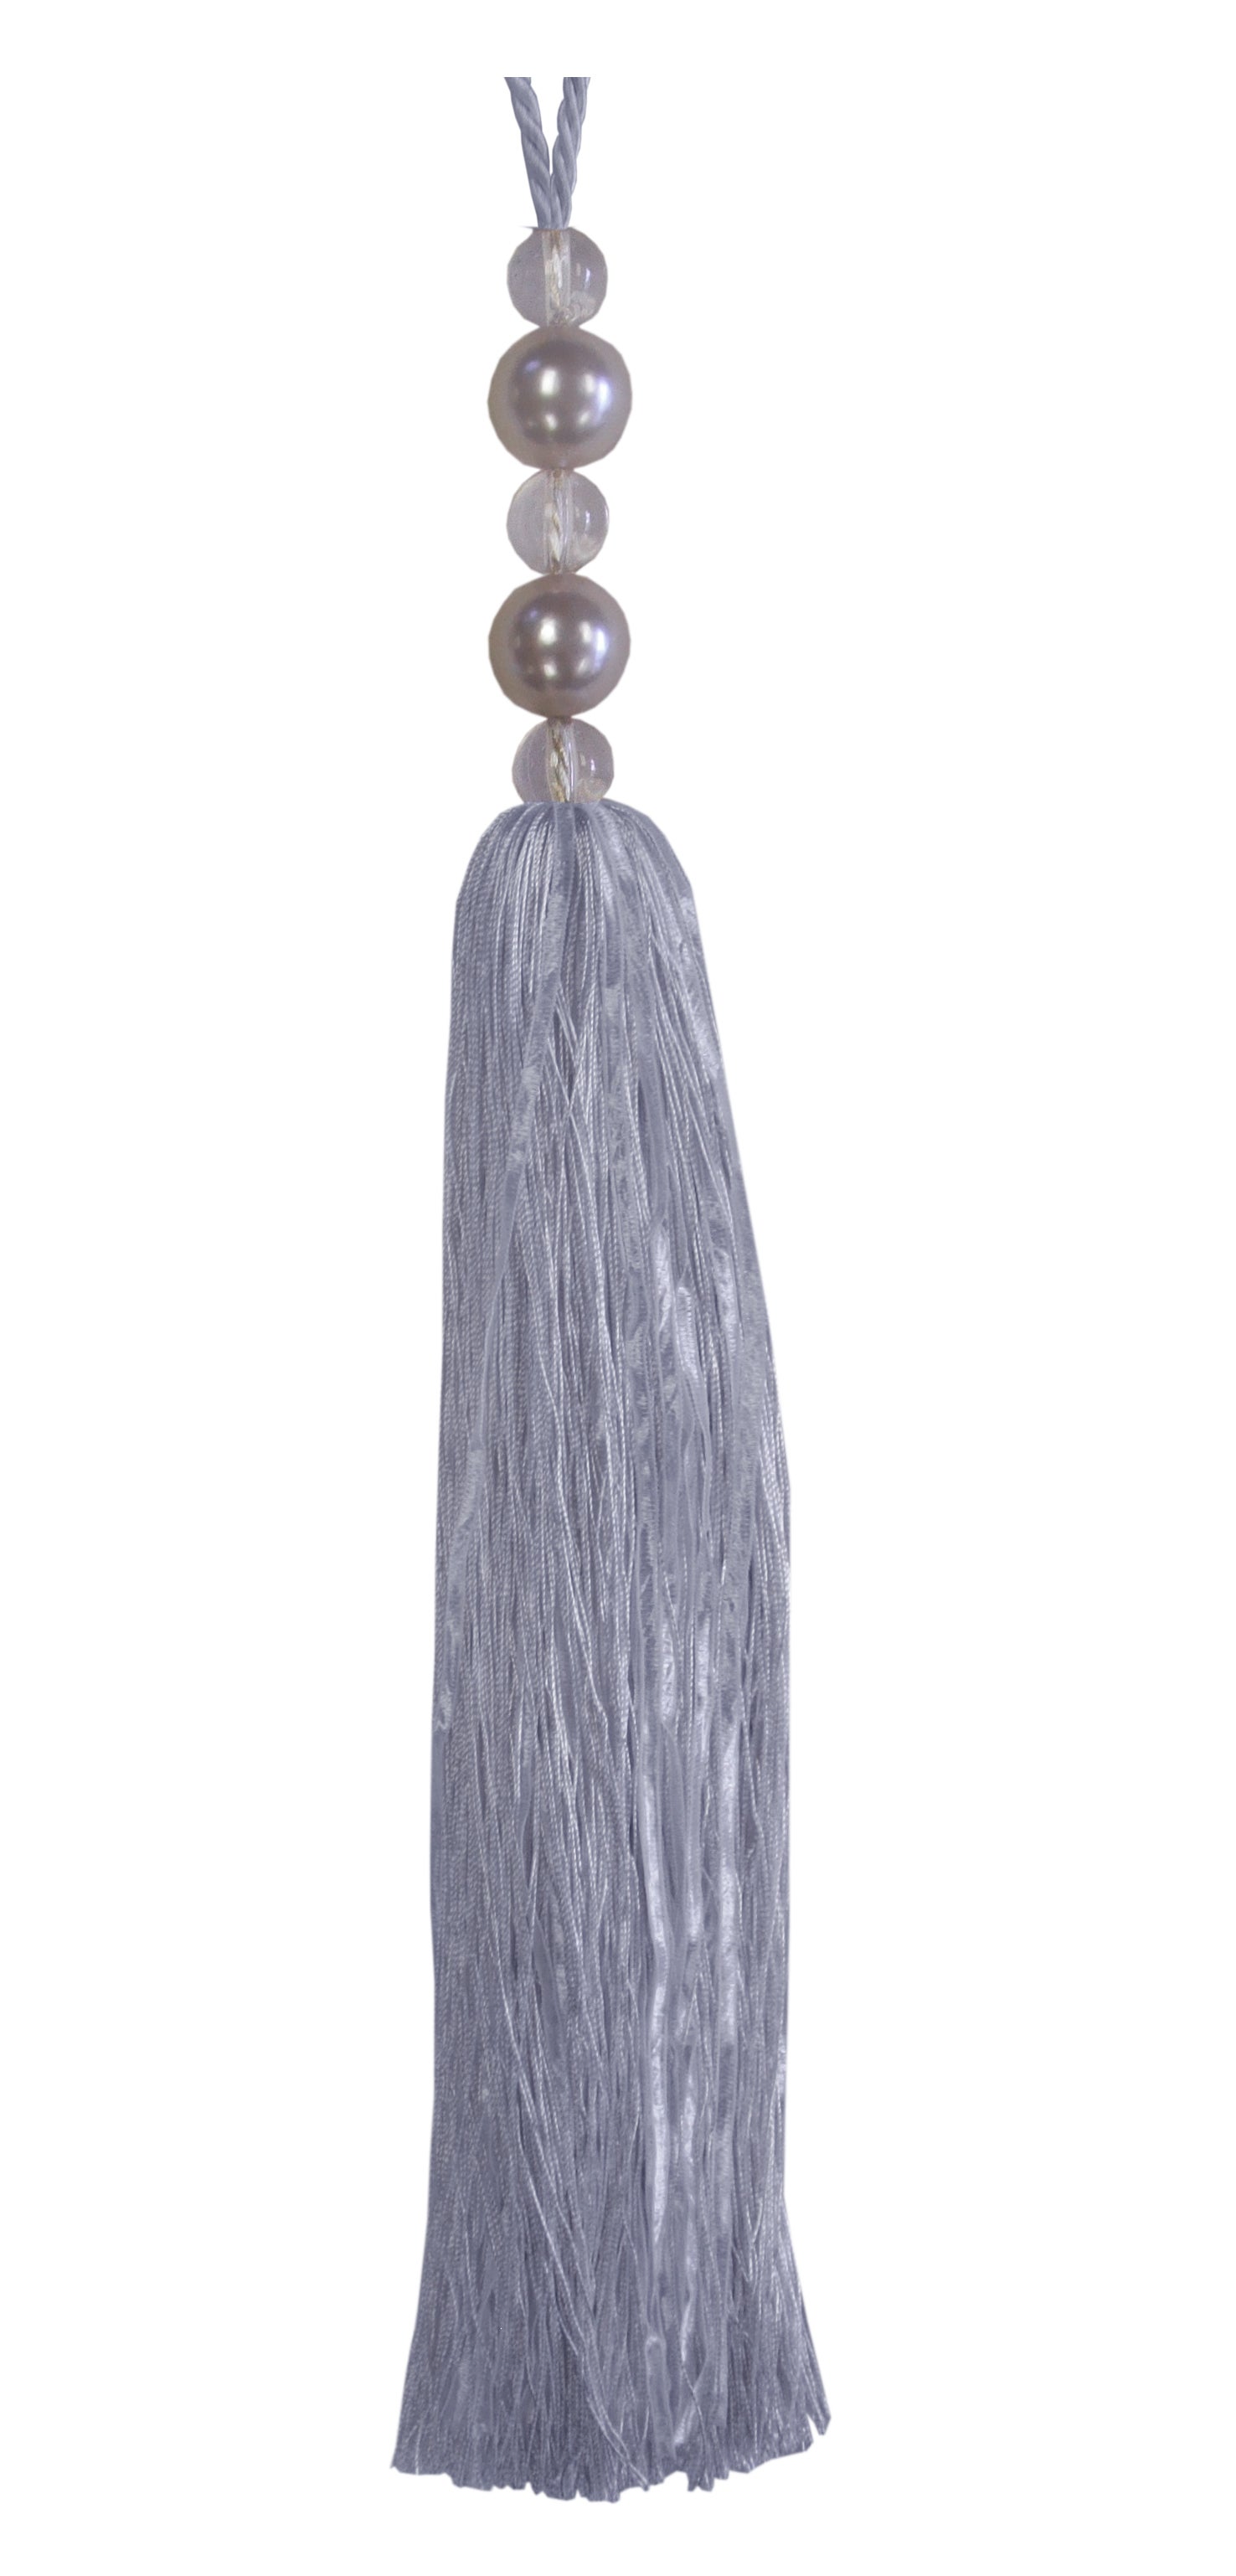 Tassel with Pearl Top - Silver Blue 25cm